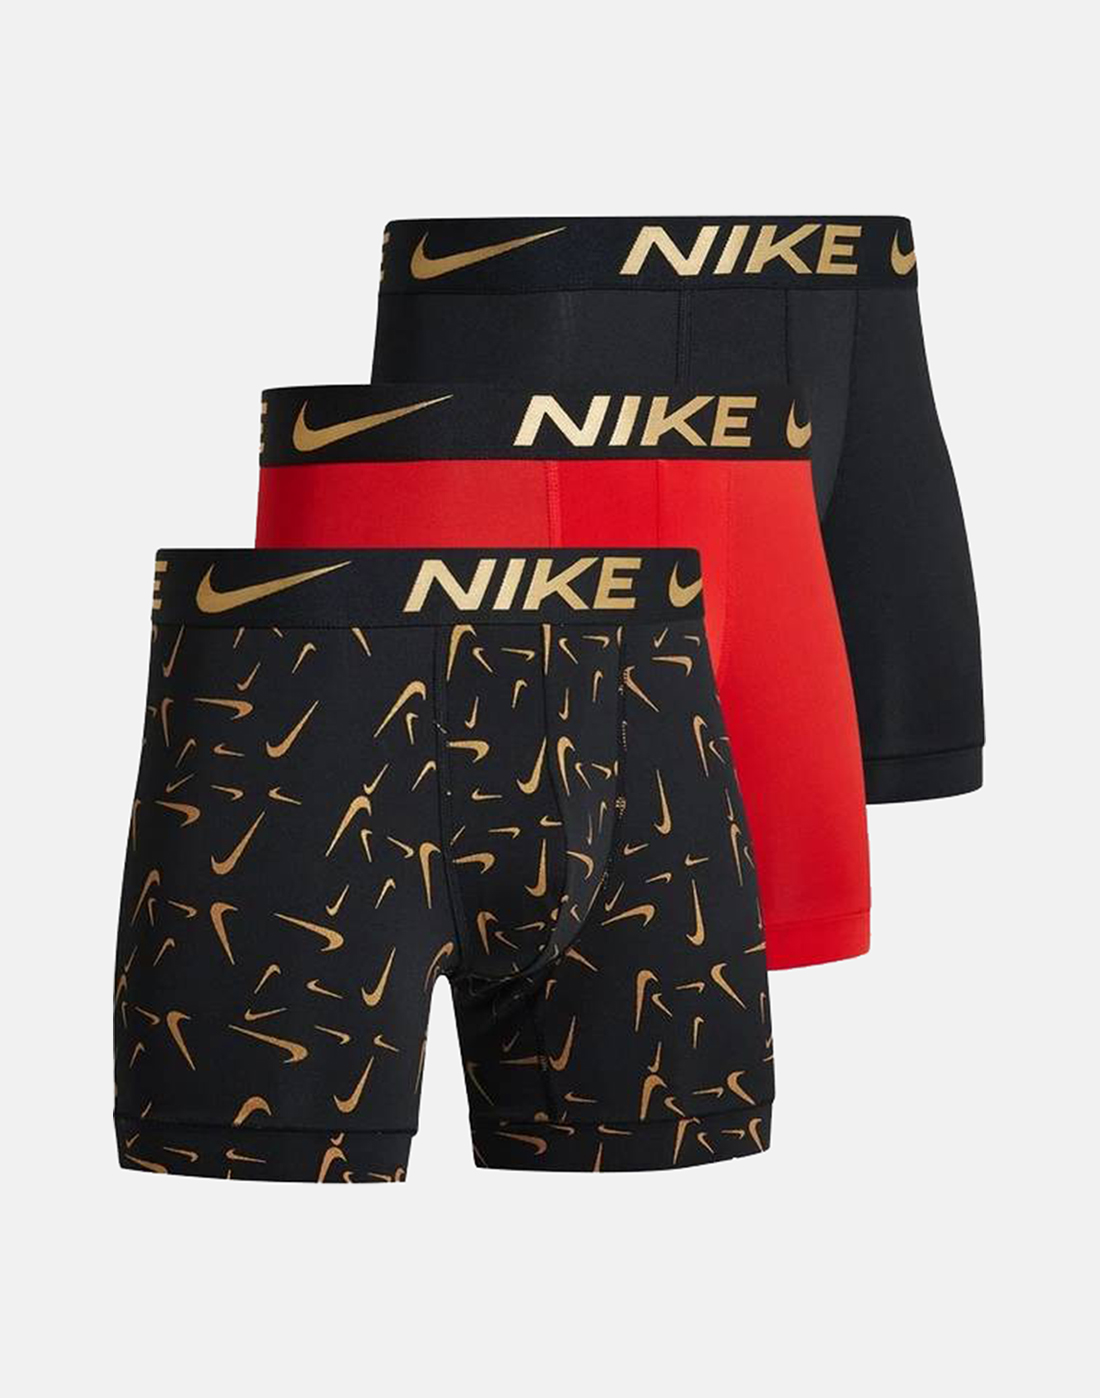 Nike Mens 3 Pack Boxer Briefs - Assorted | Life Style Sports IE